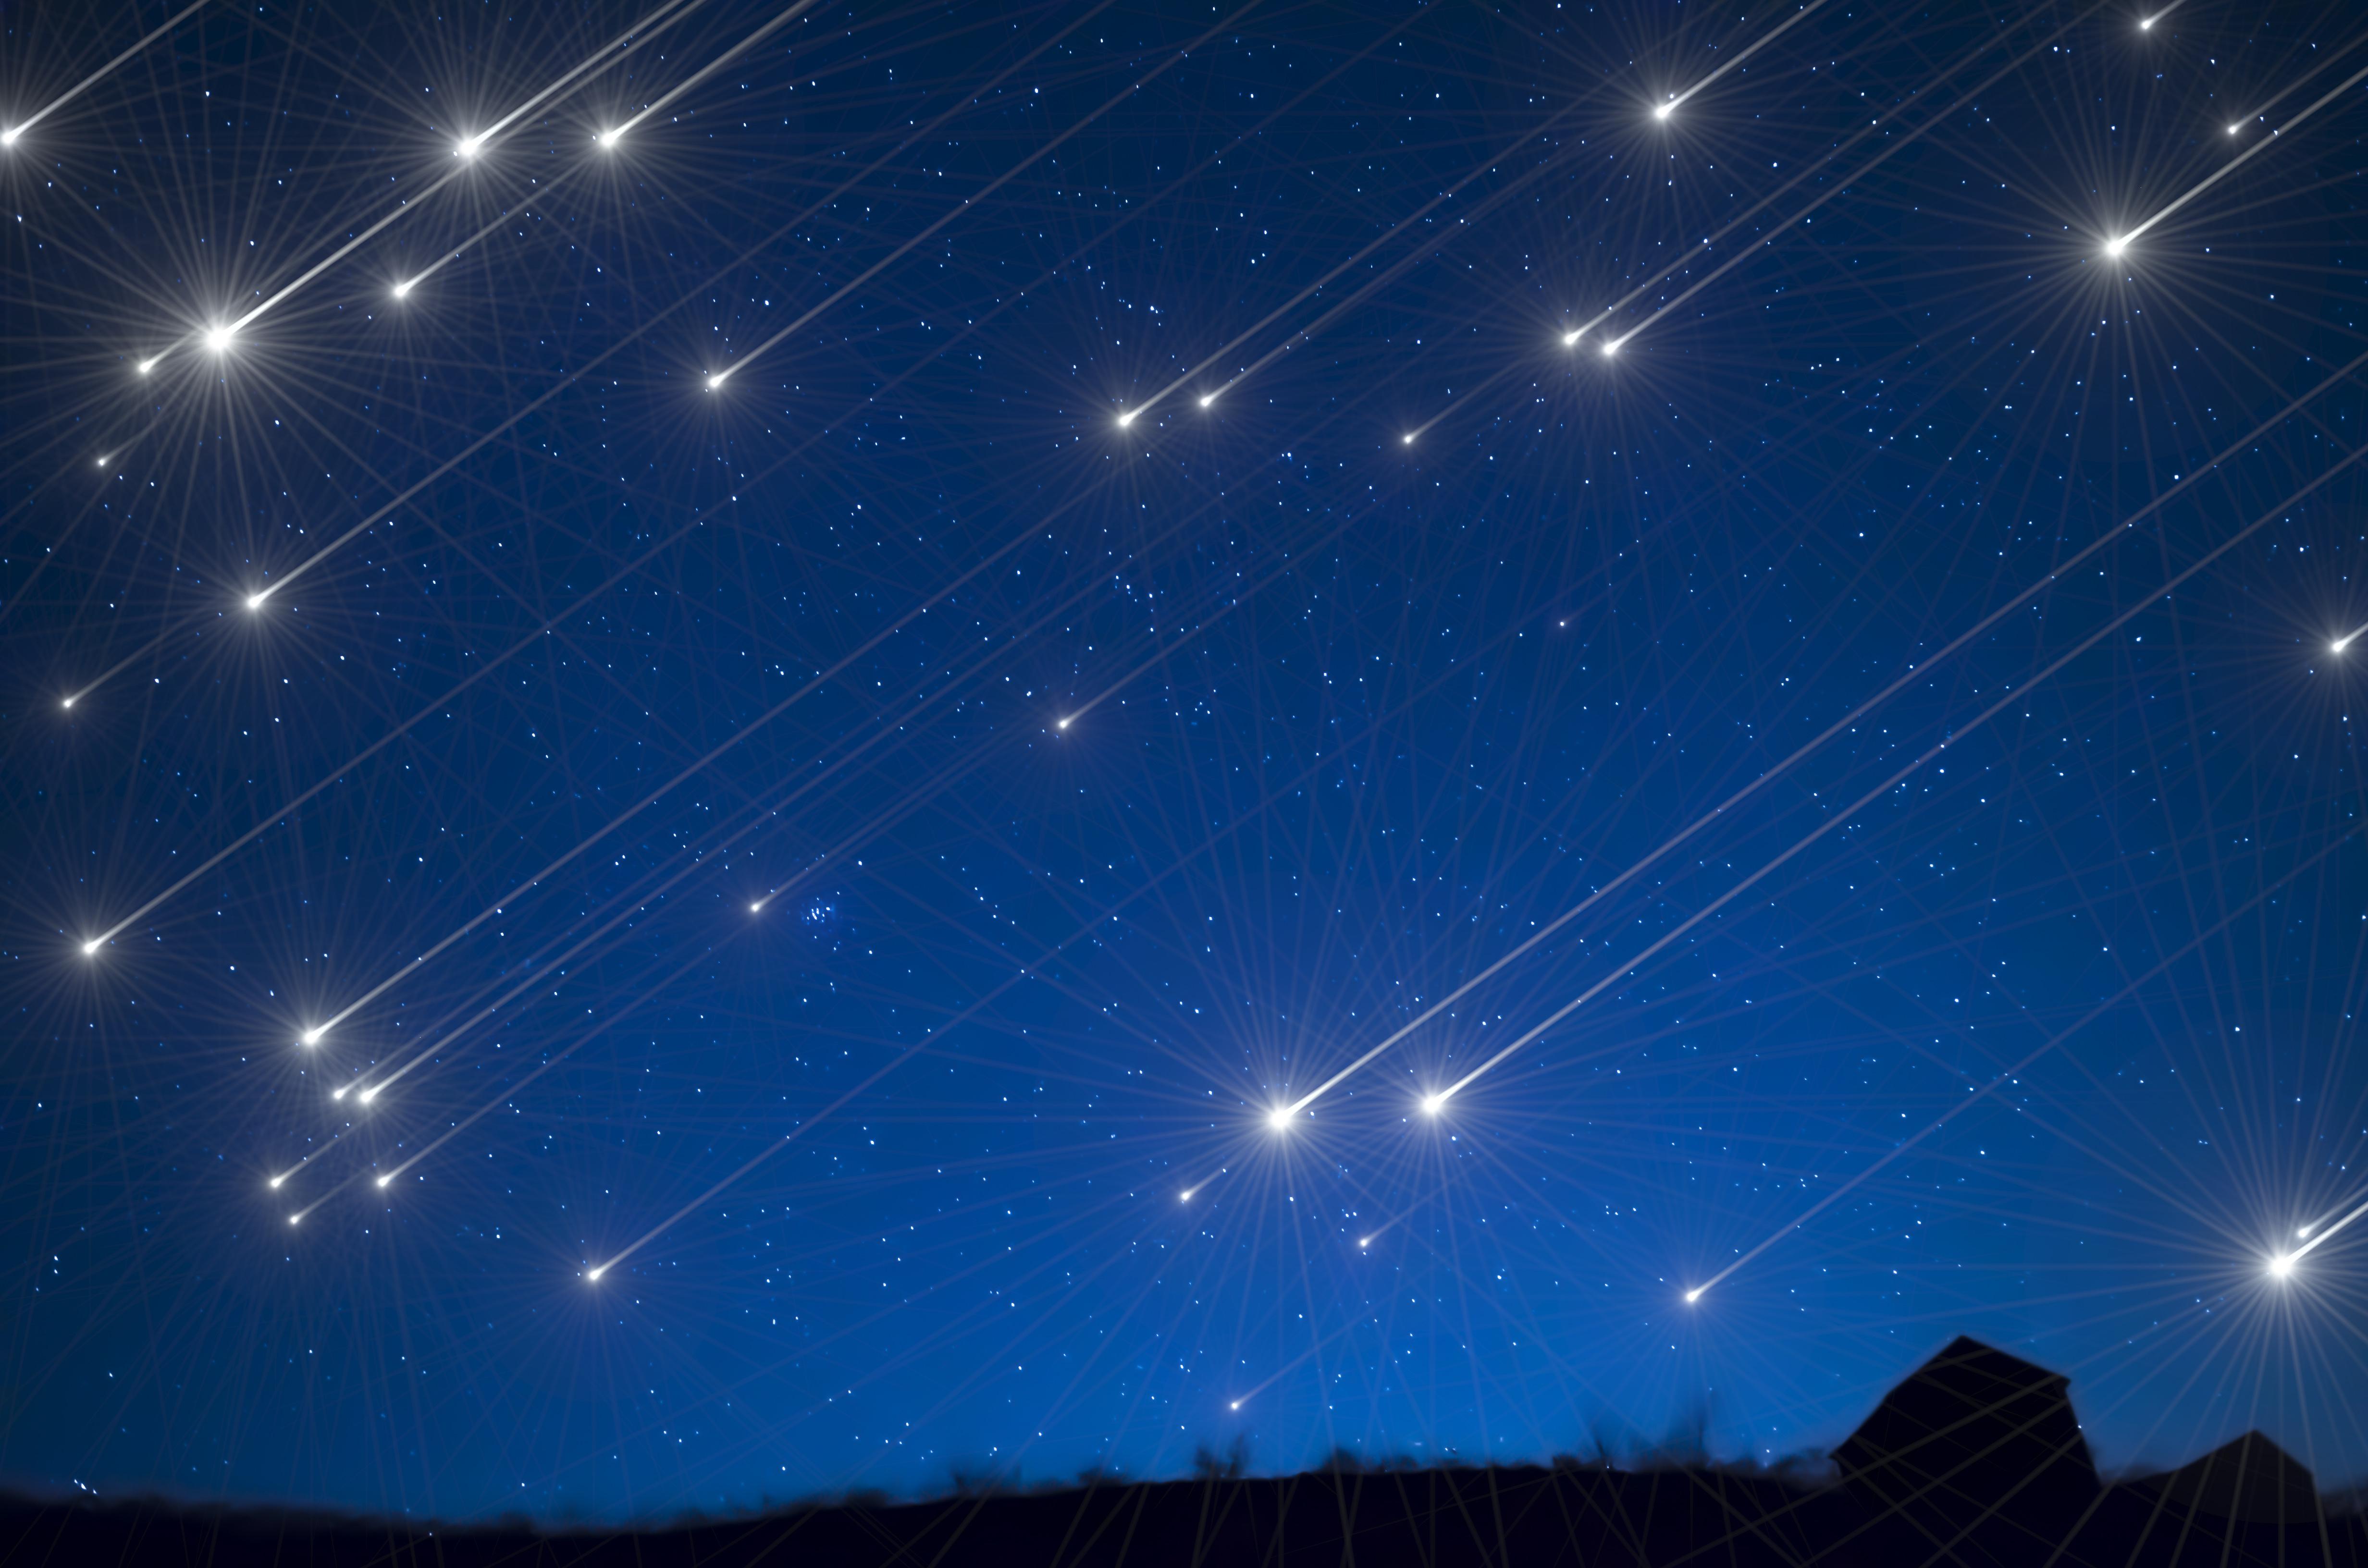 A picture of a night sky alight with shooting stars